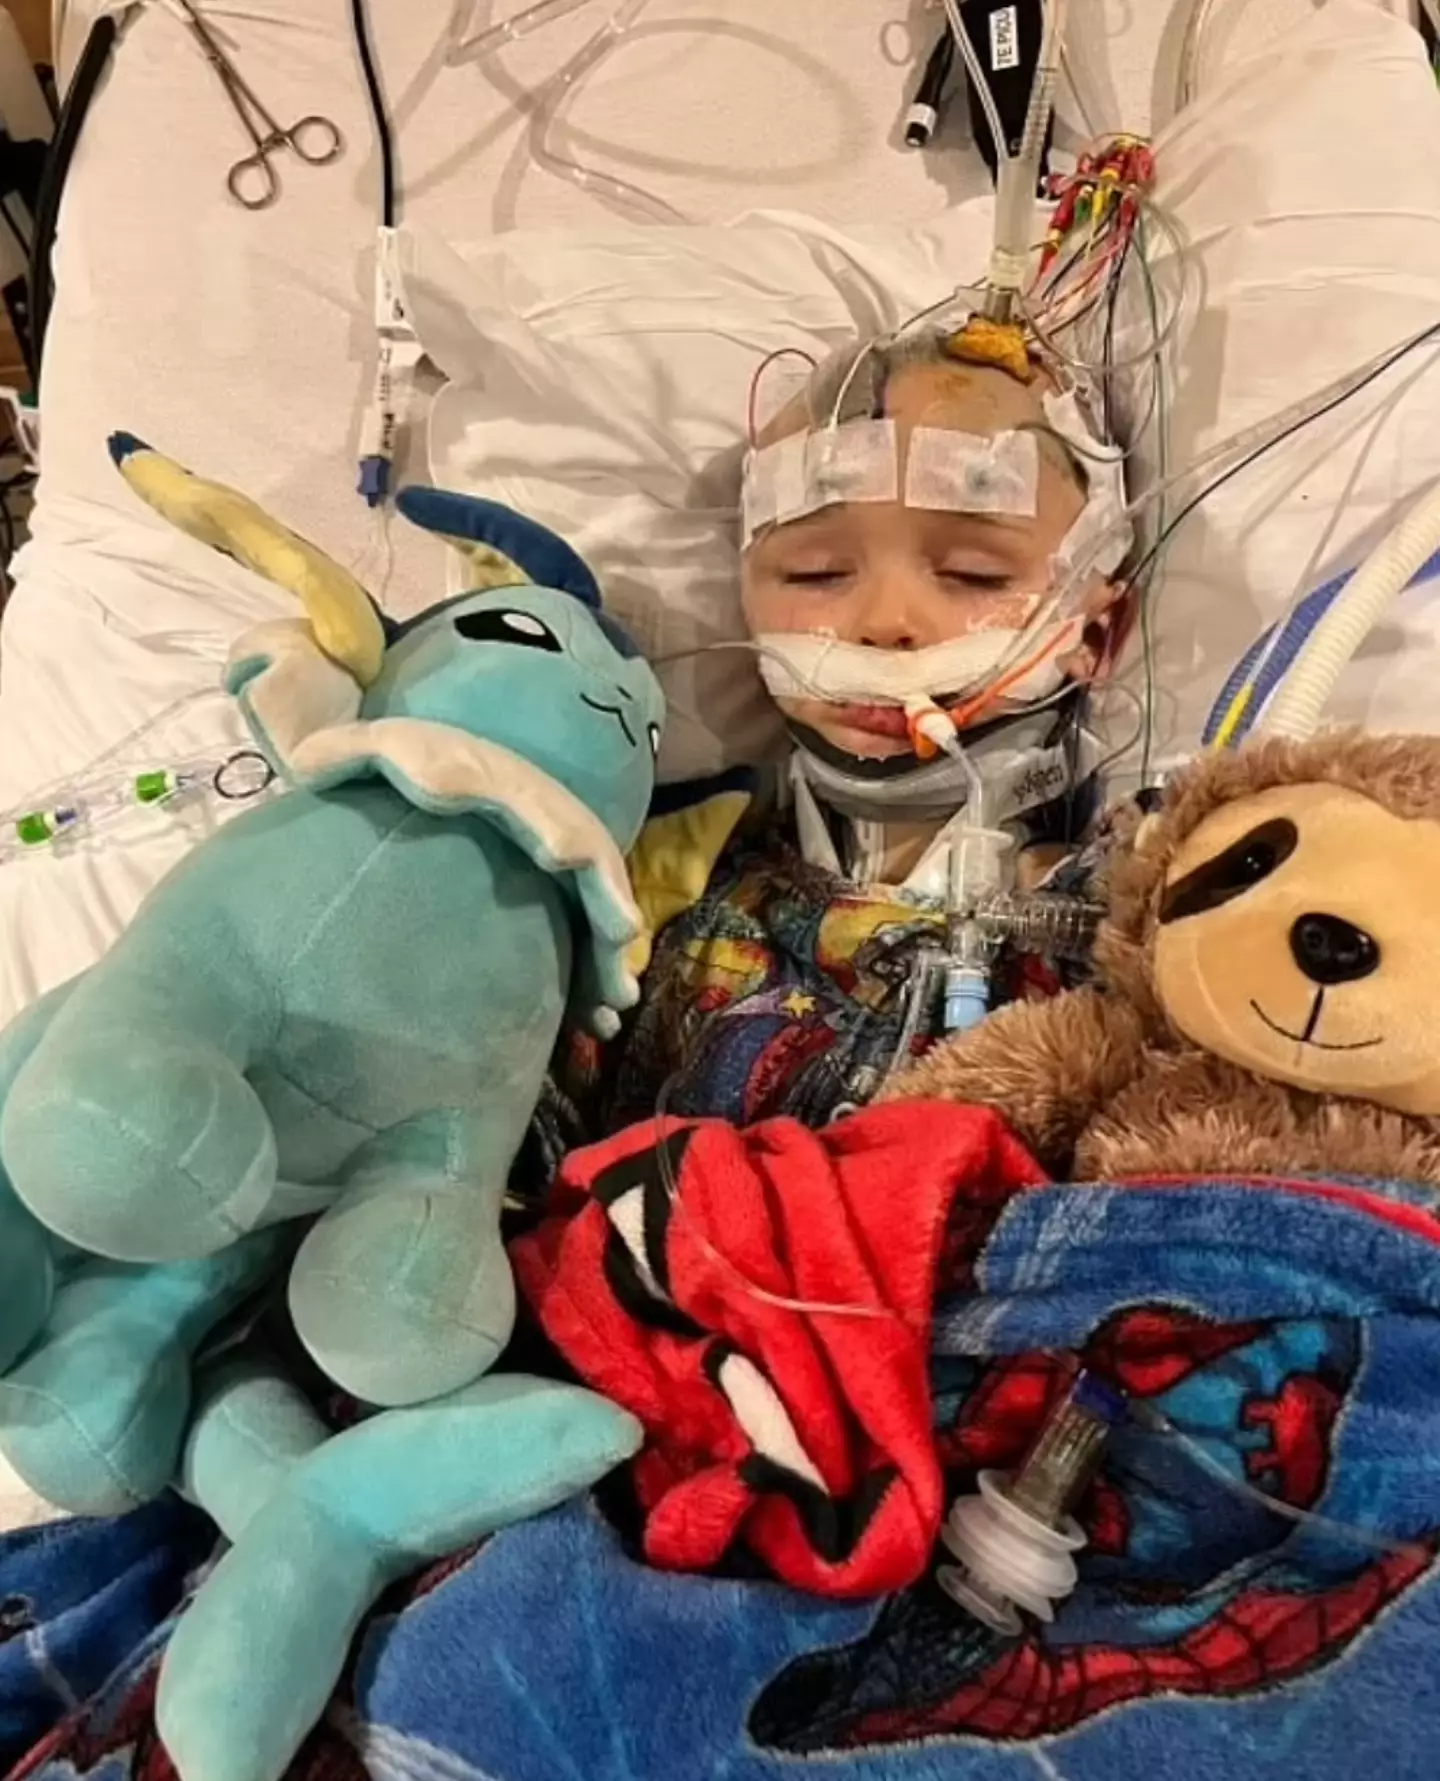 Little Noah is in hospital on life support.